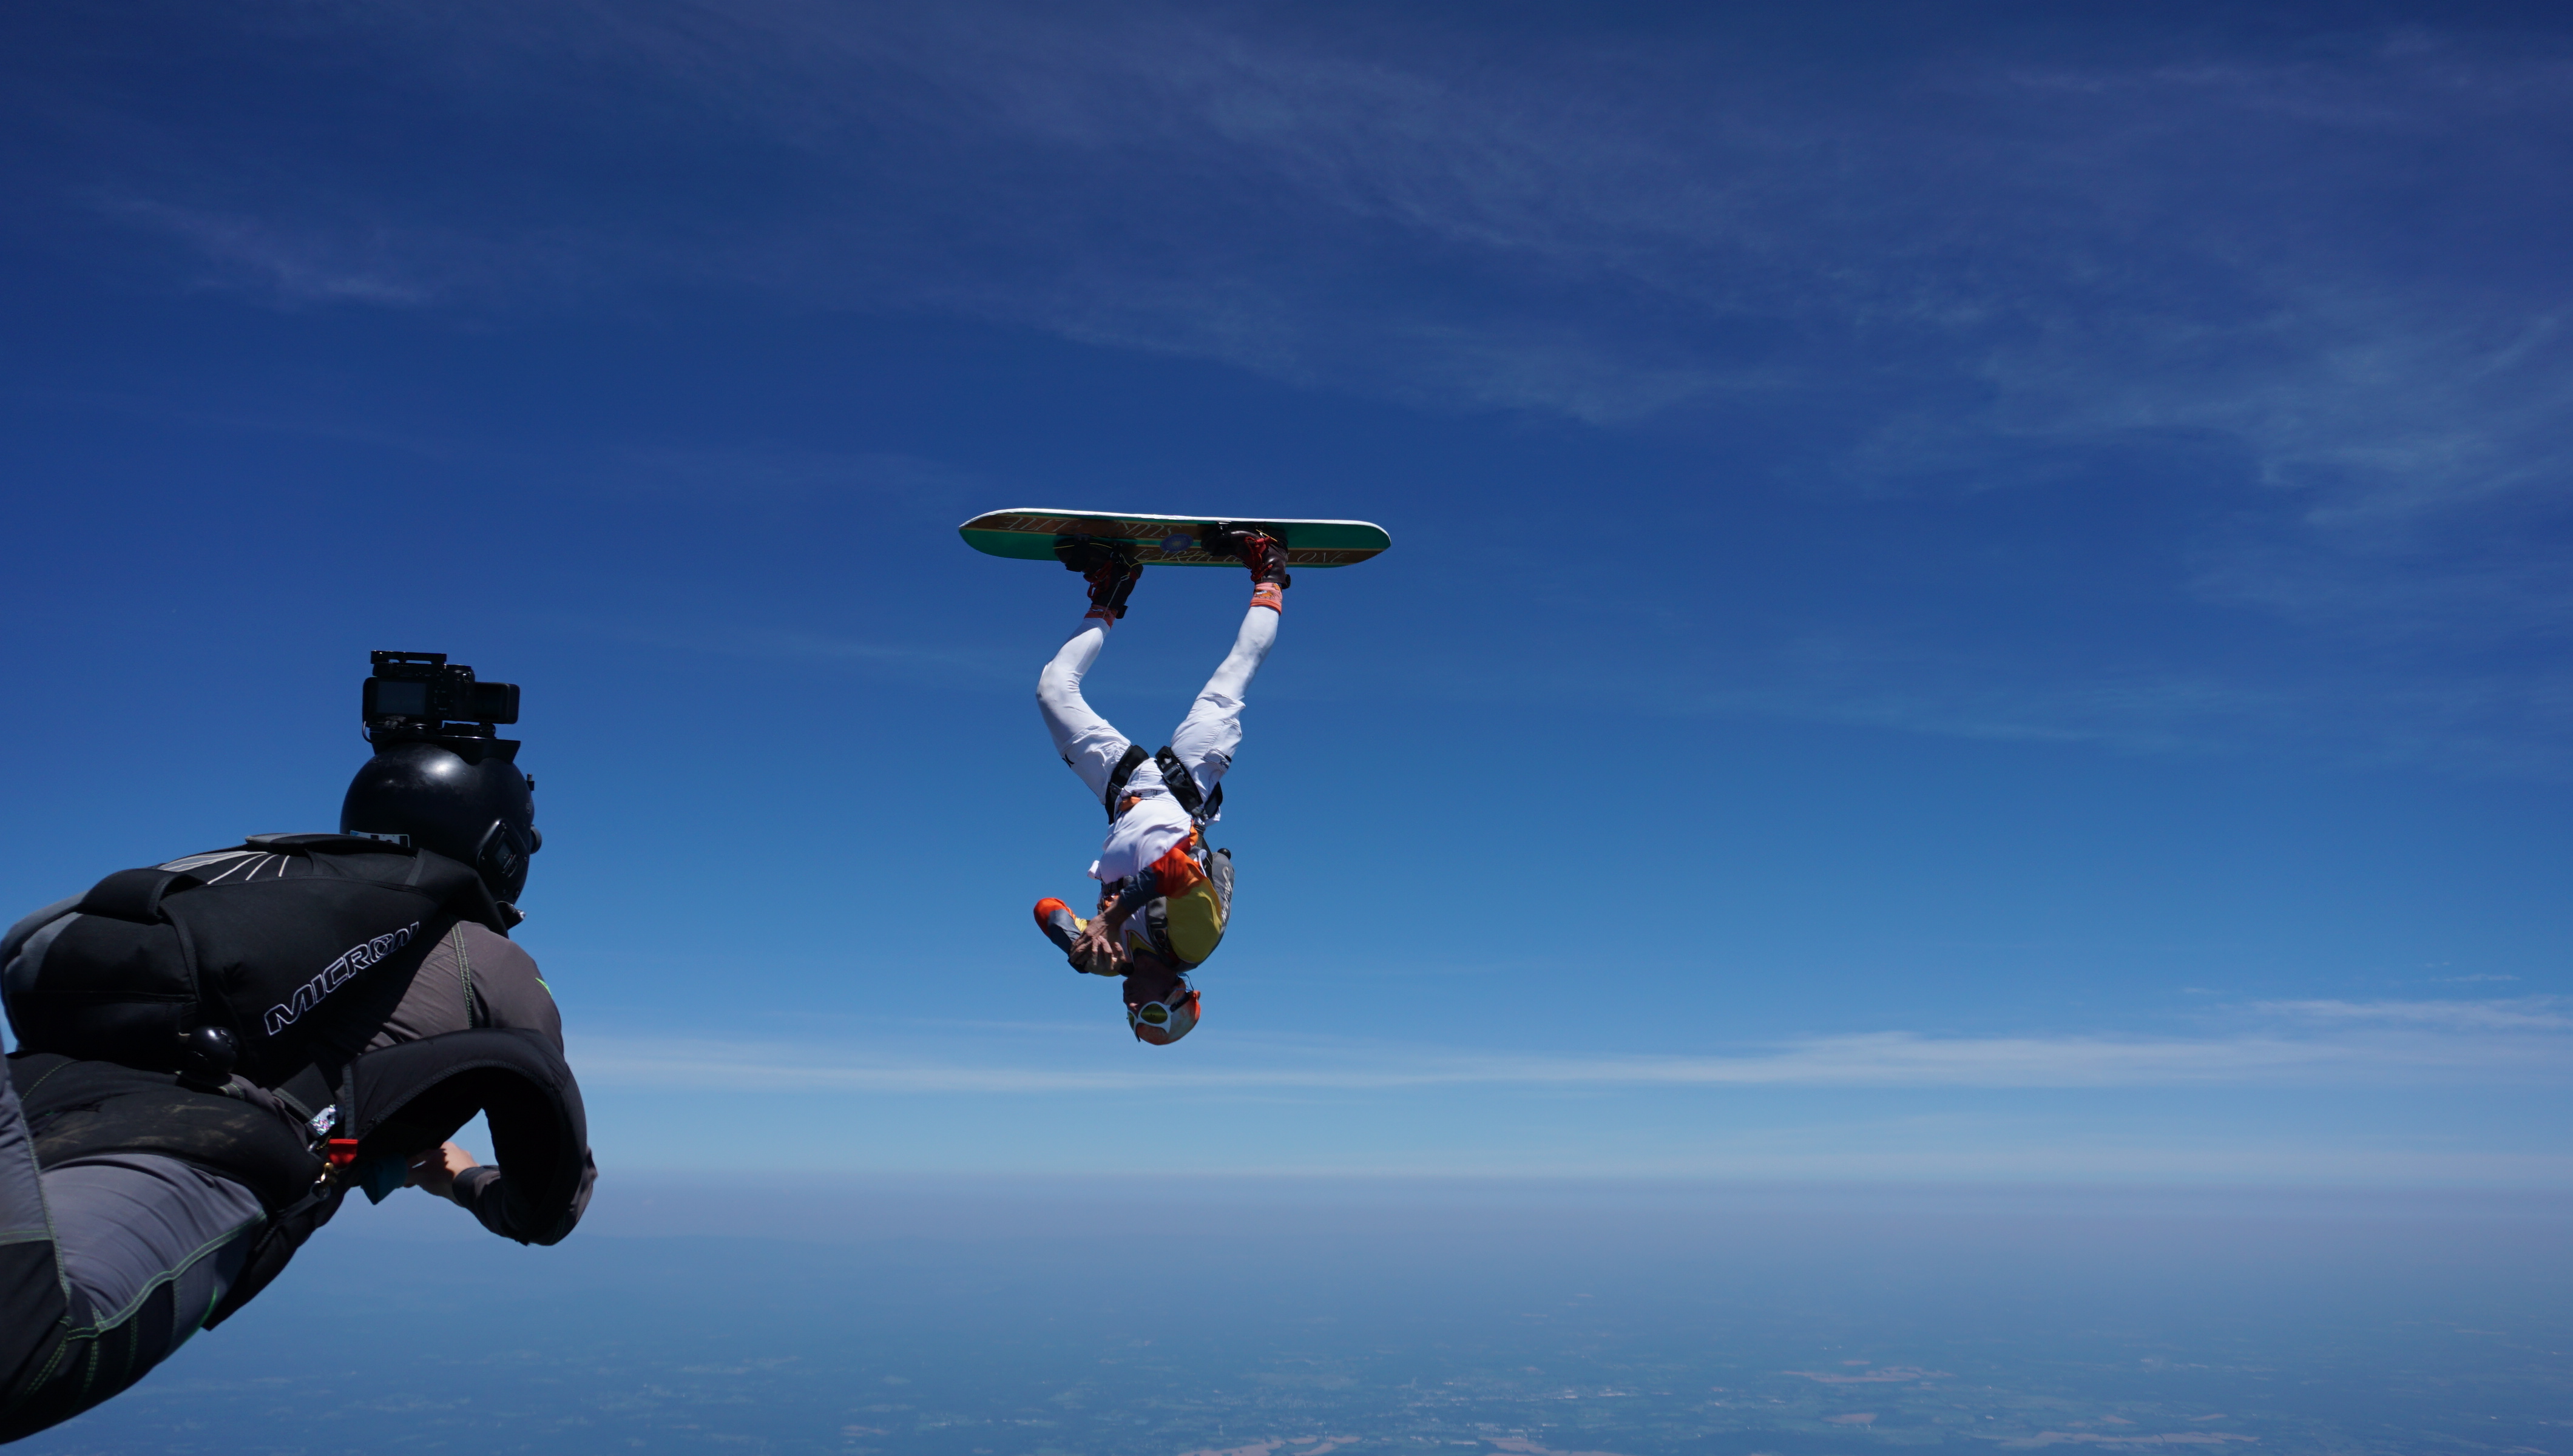 Monica Noncheva is one of very few Camera Flyers for Skysurfing